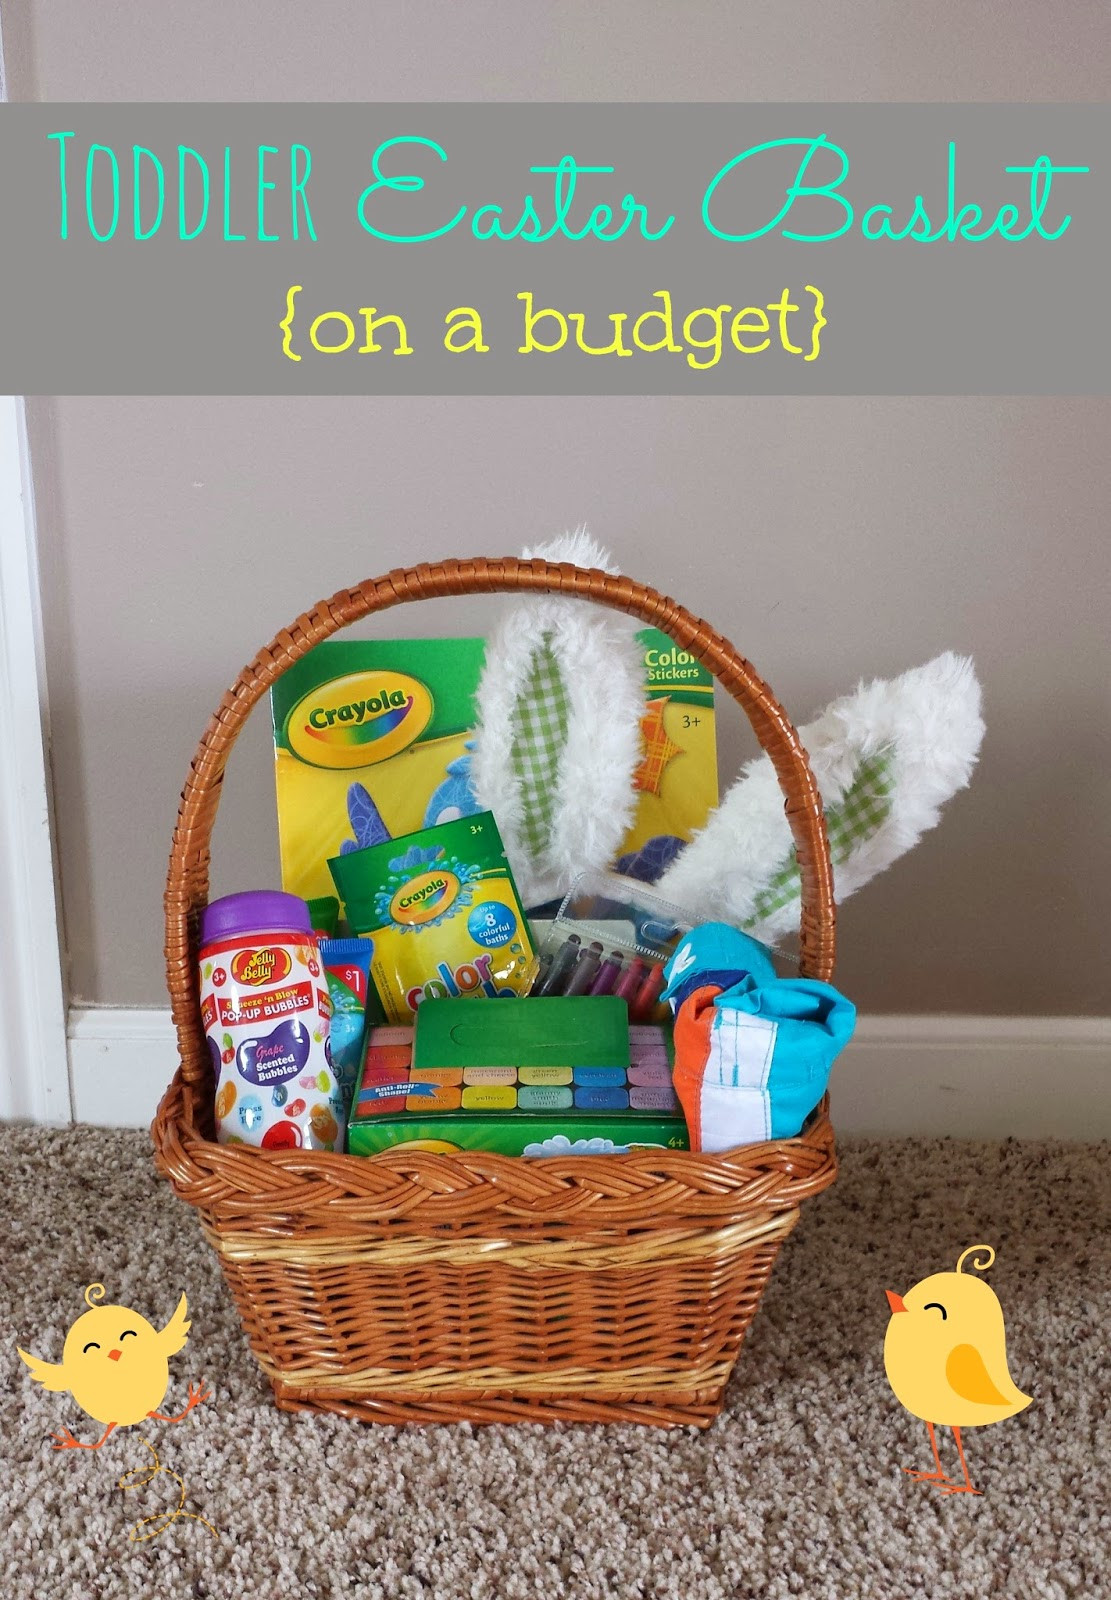 Toddlers Easter Basket Ideas
 Simple Suburbia Toddler Easter Basket Ideas